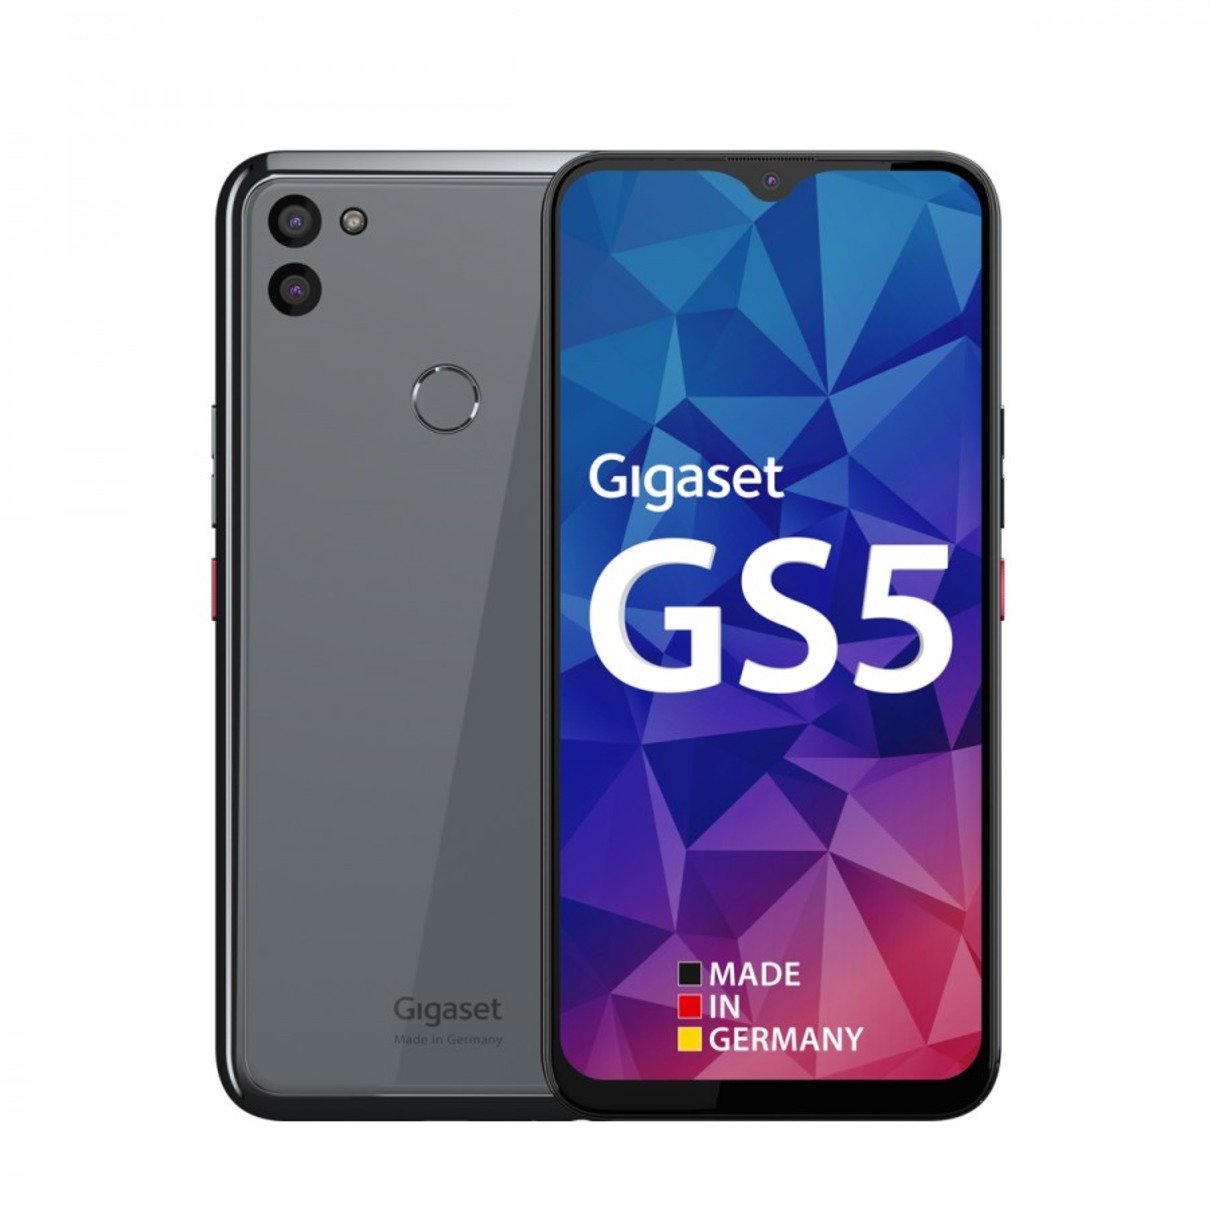 Gigaset-GS5-launched-with-Helio-G85